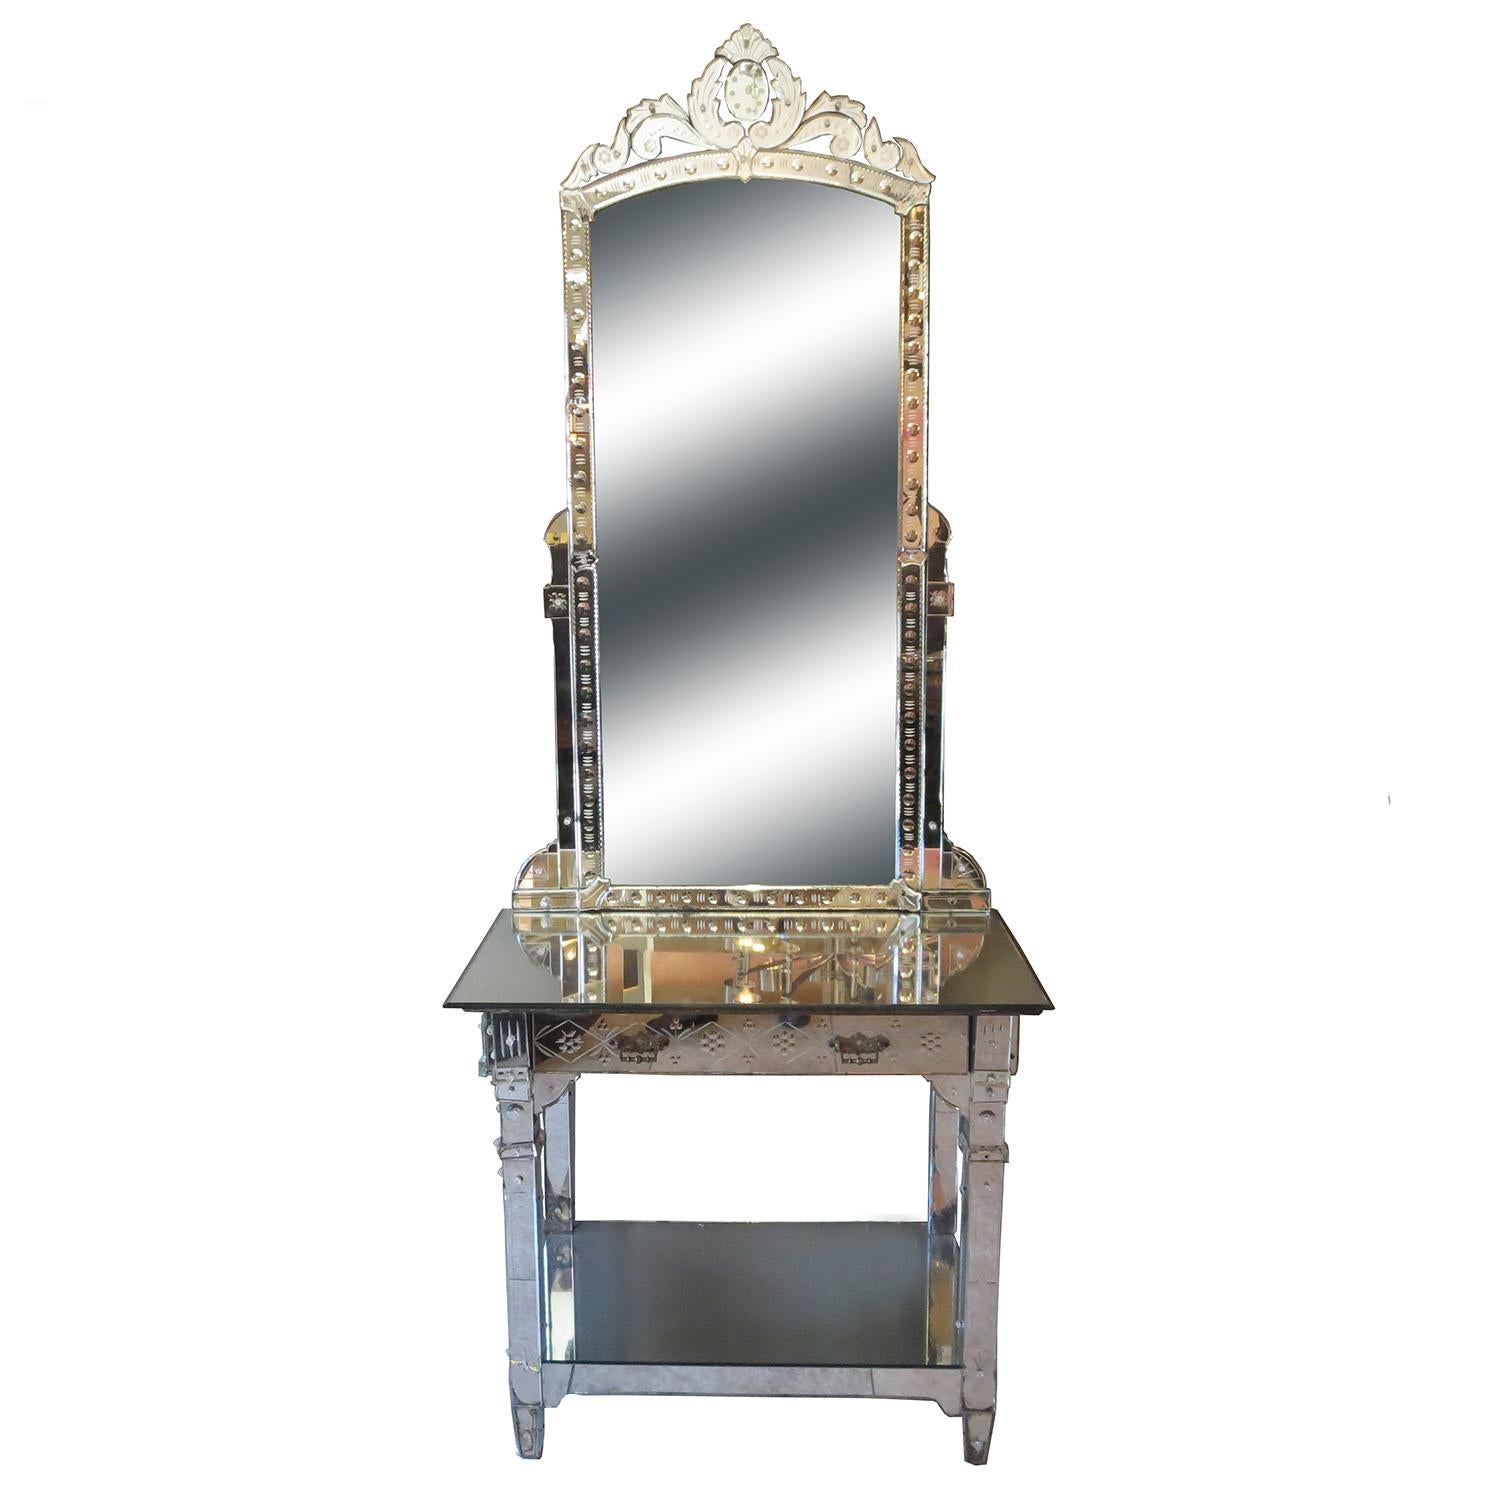 This glamorous mirrored vanity came from the Hollywood apartment of Bette Davis near Sunset Boulevard. It features multiple panels of beveled mirror, decorated with floral etched designs. There is overall wear and some chipped panels. A few of the